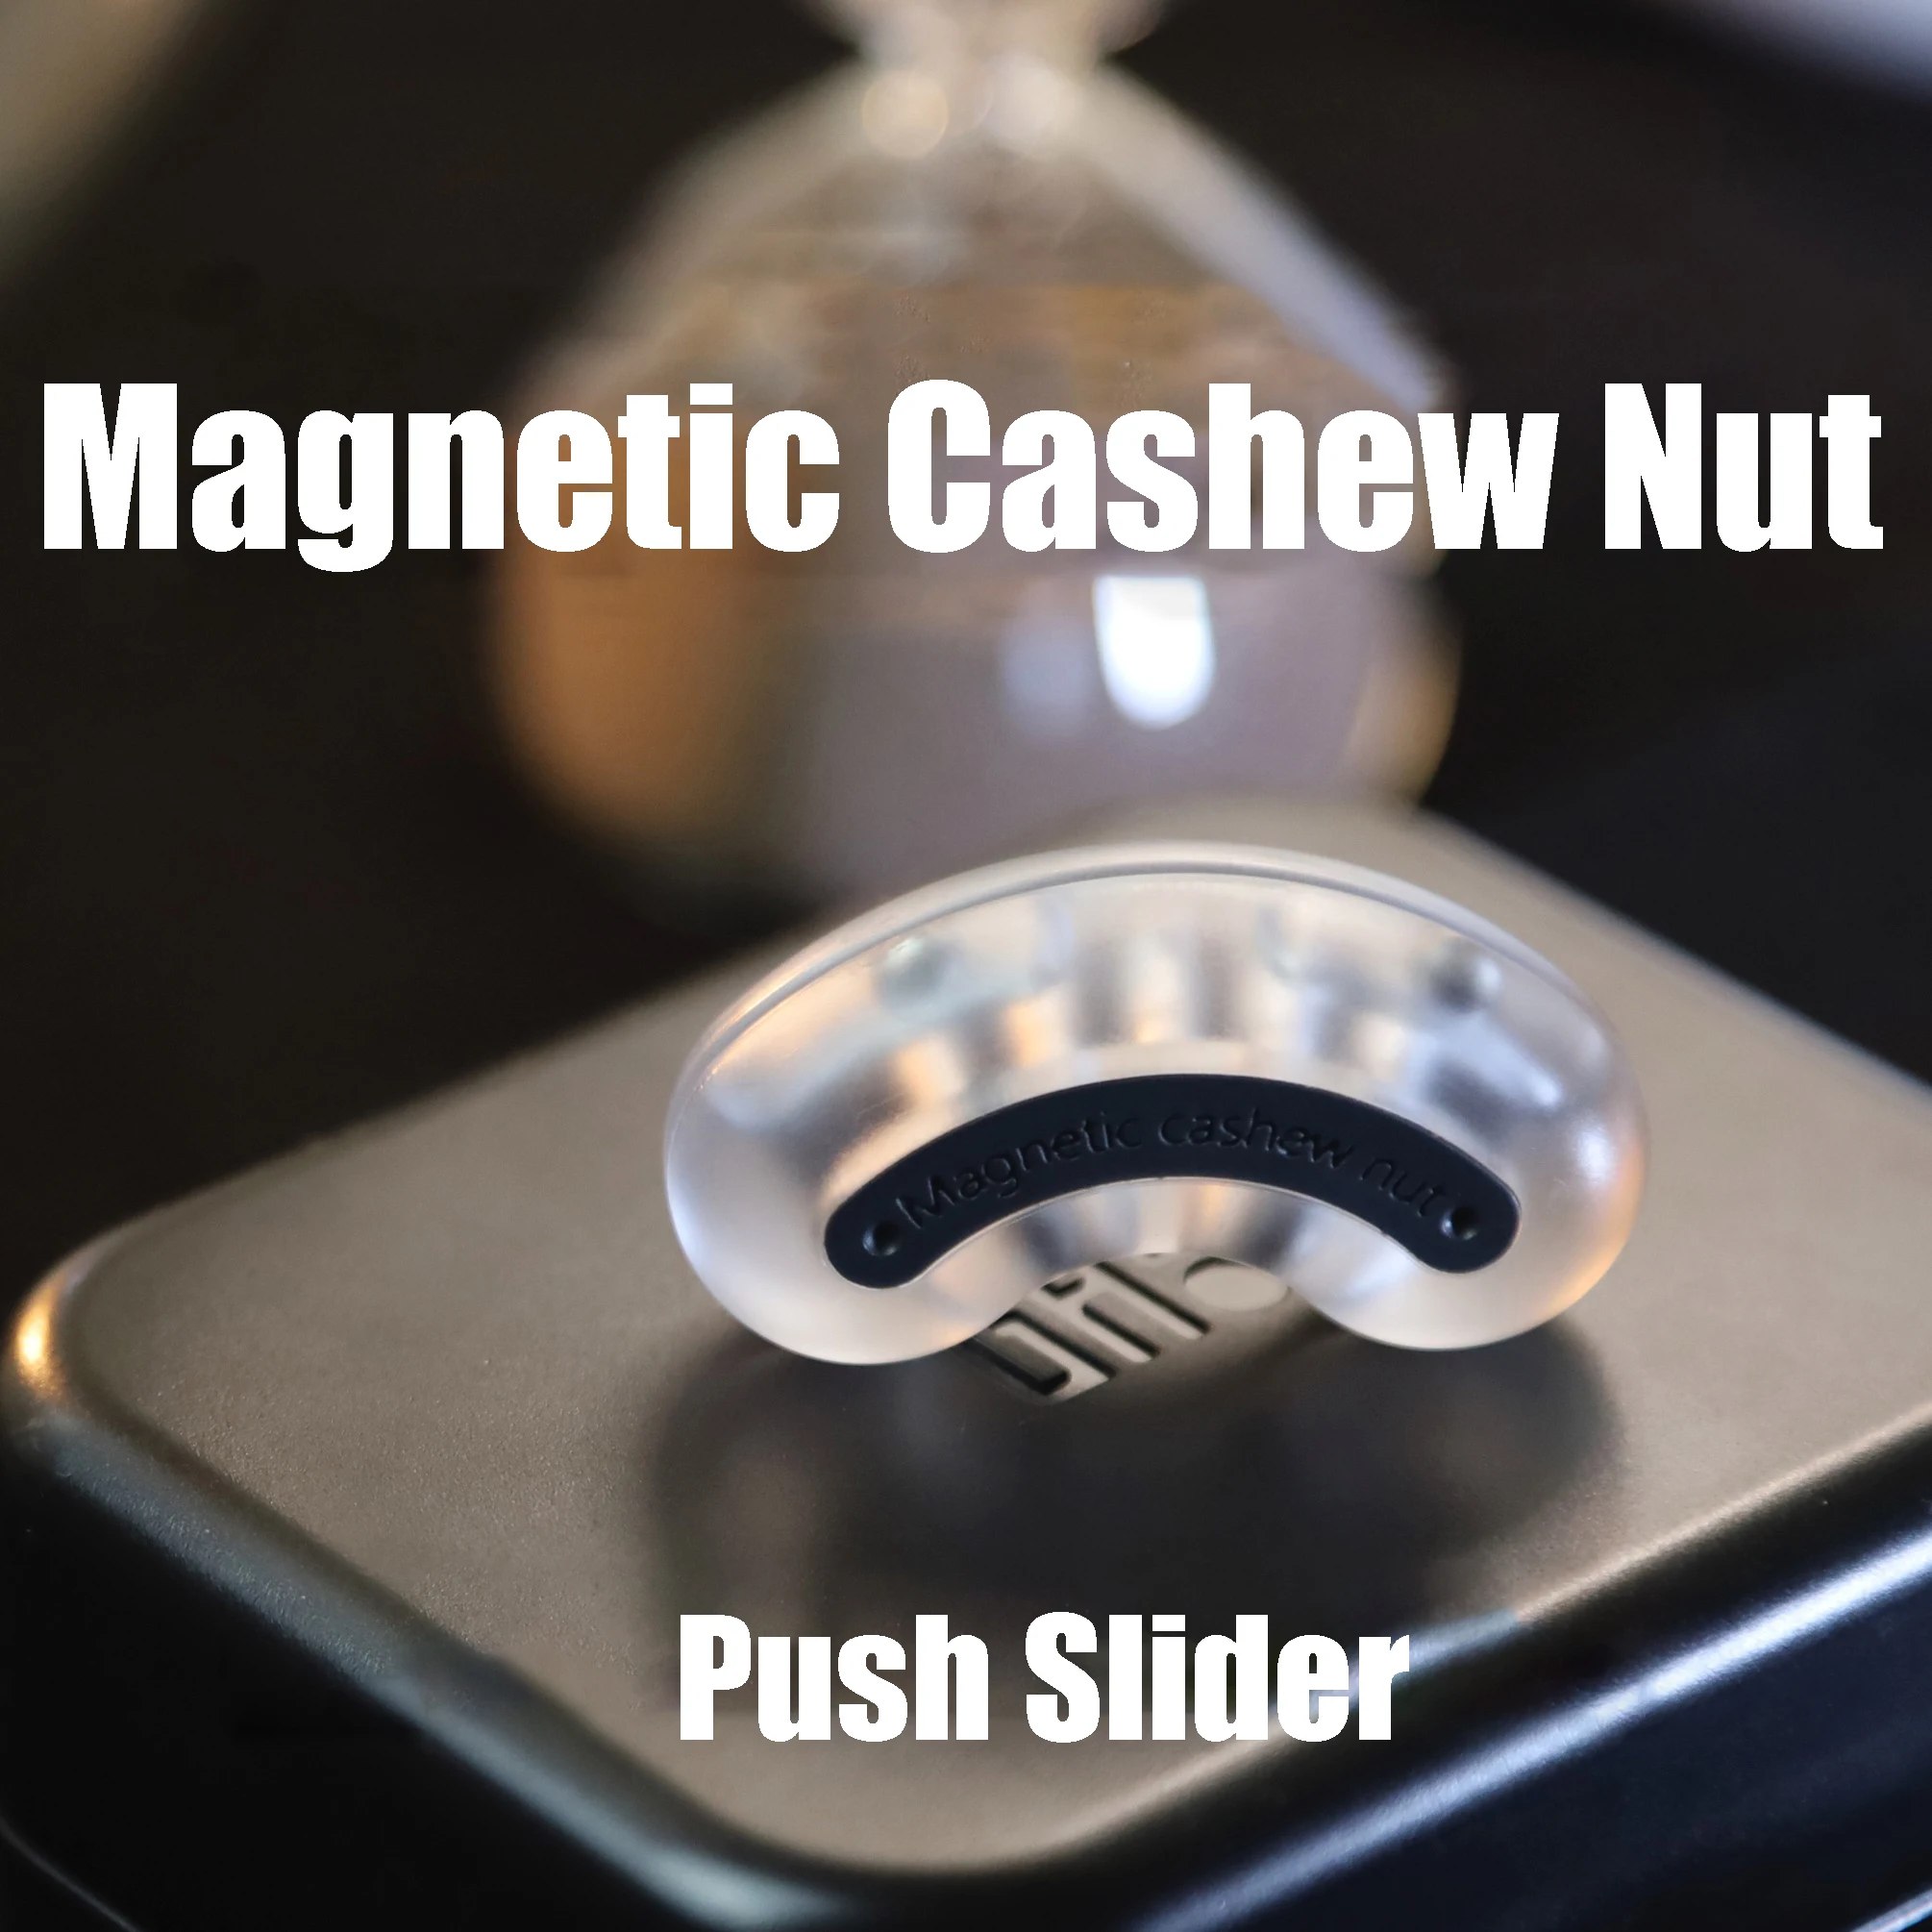 GAO Studio Magnetic Cashew Nut Push Card Push Egg Edc Decompression Toy Office Decompression Magnetic Toy Trendy Play enlarge